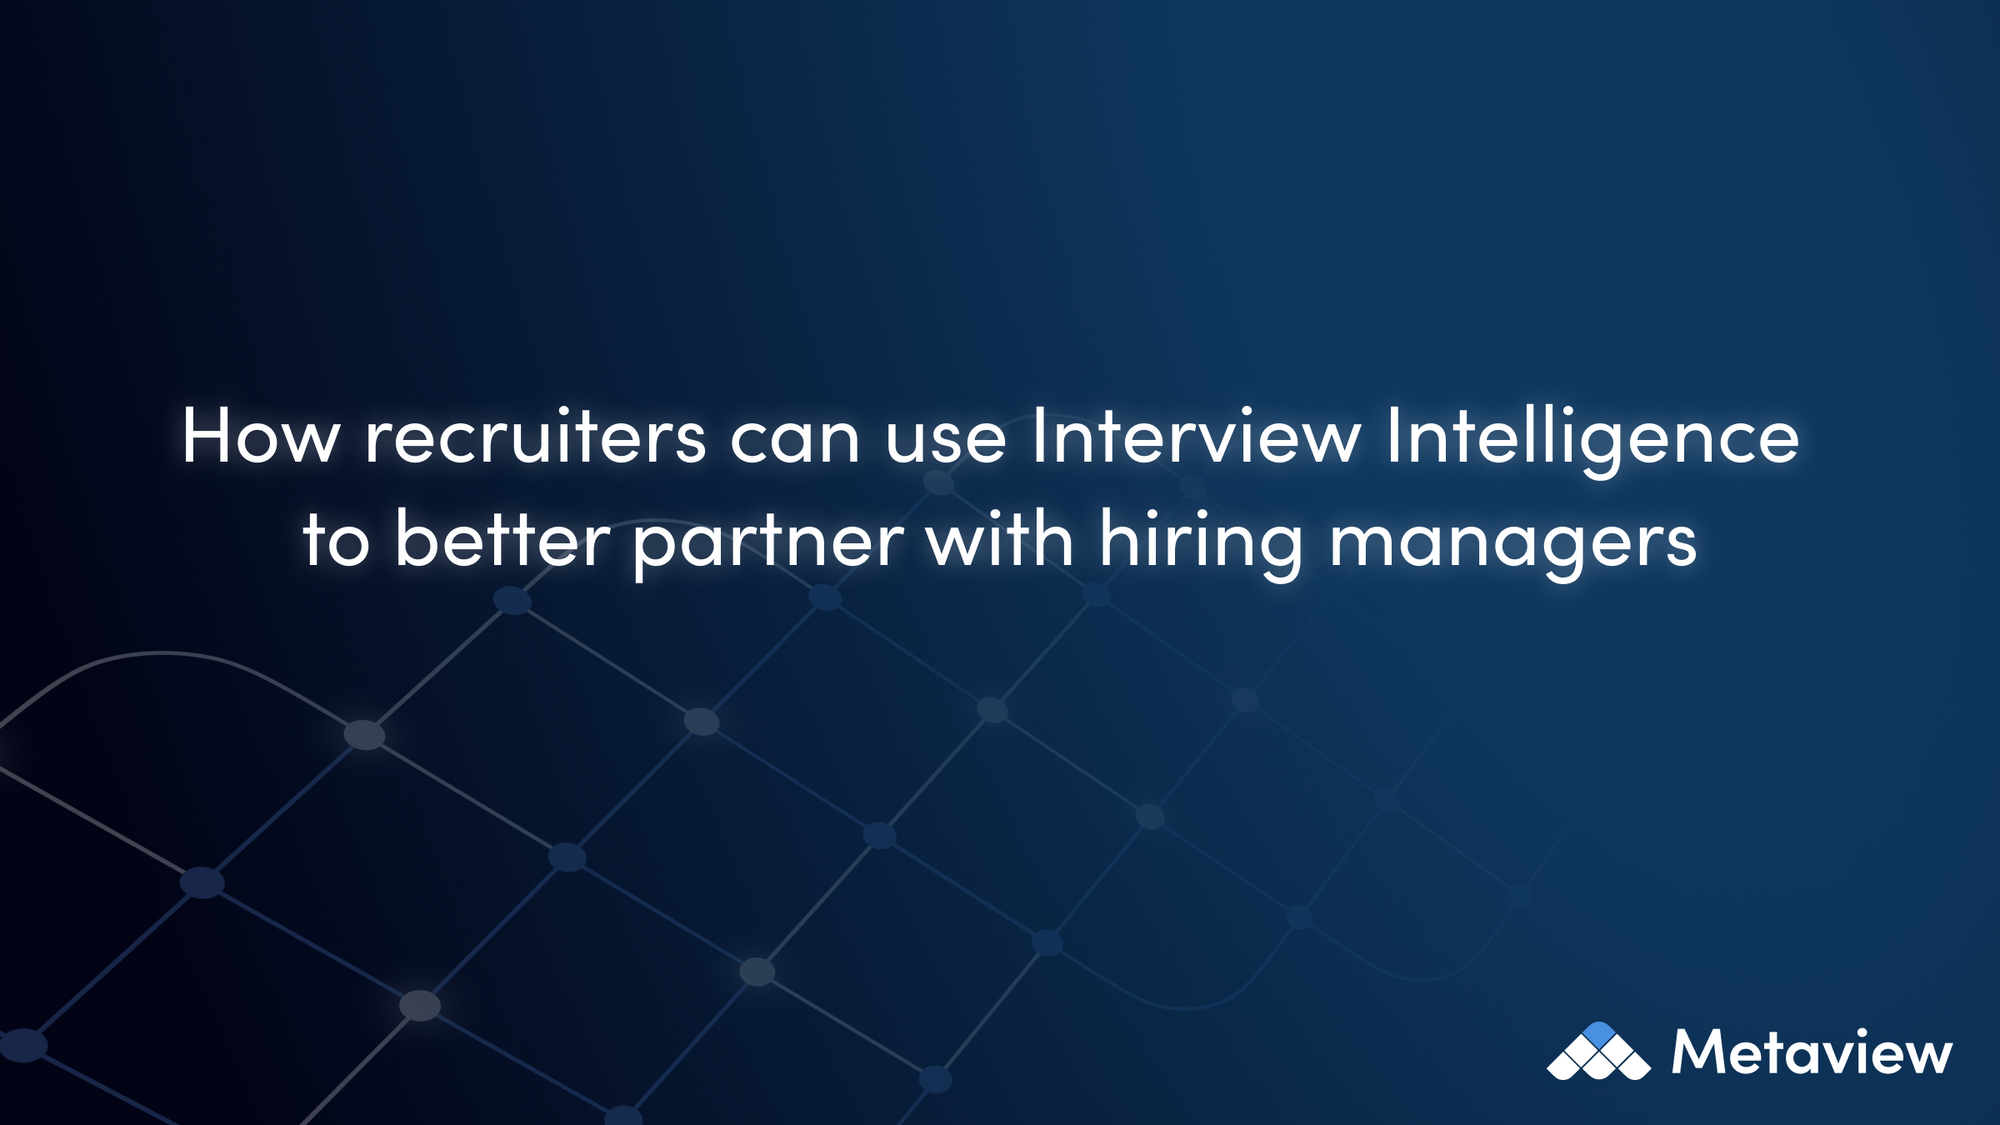 How recruiters can use Interview Intelligence to better partner with hiring managers